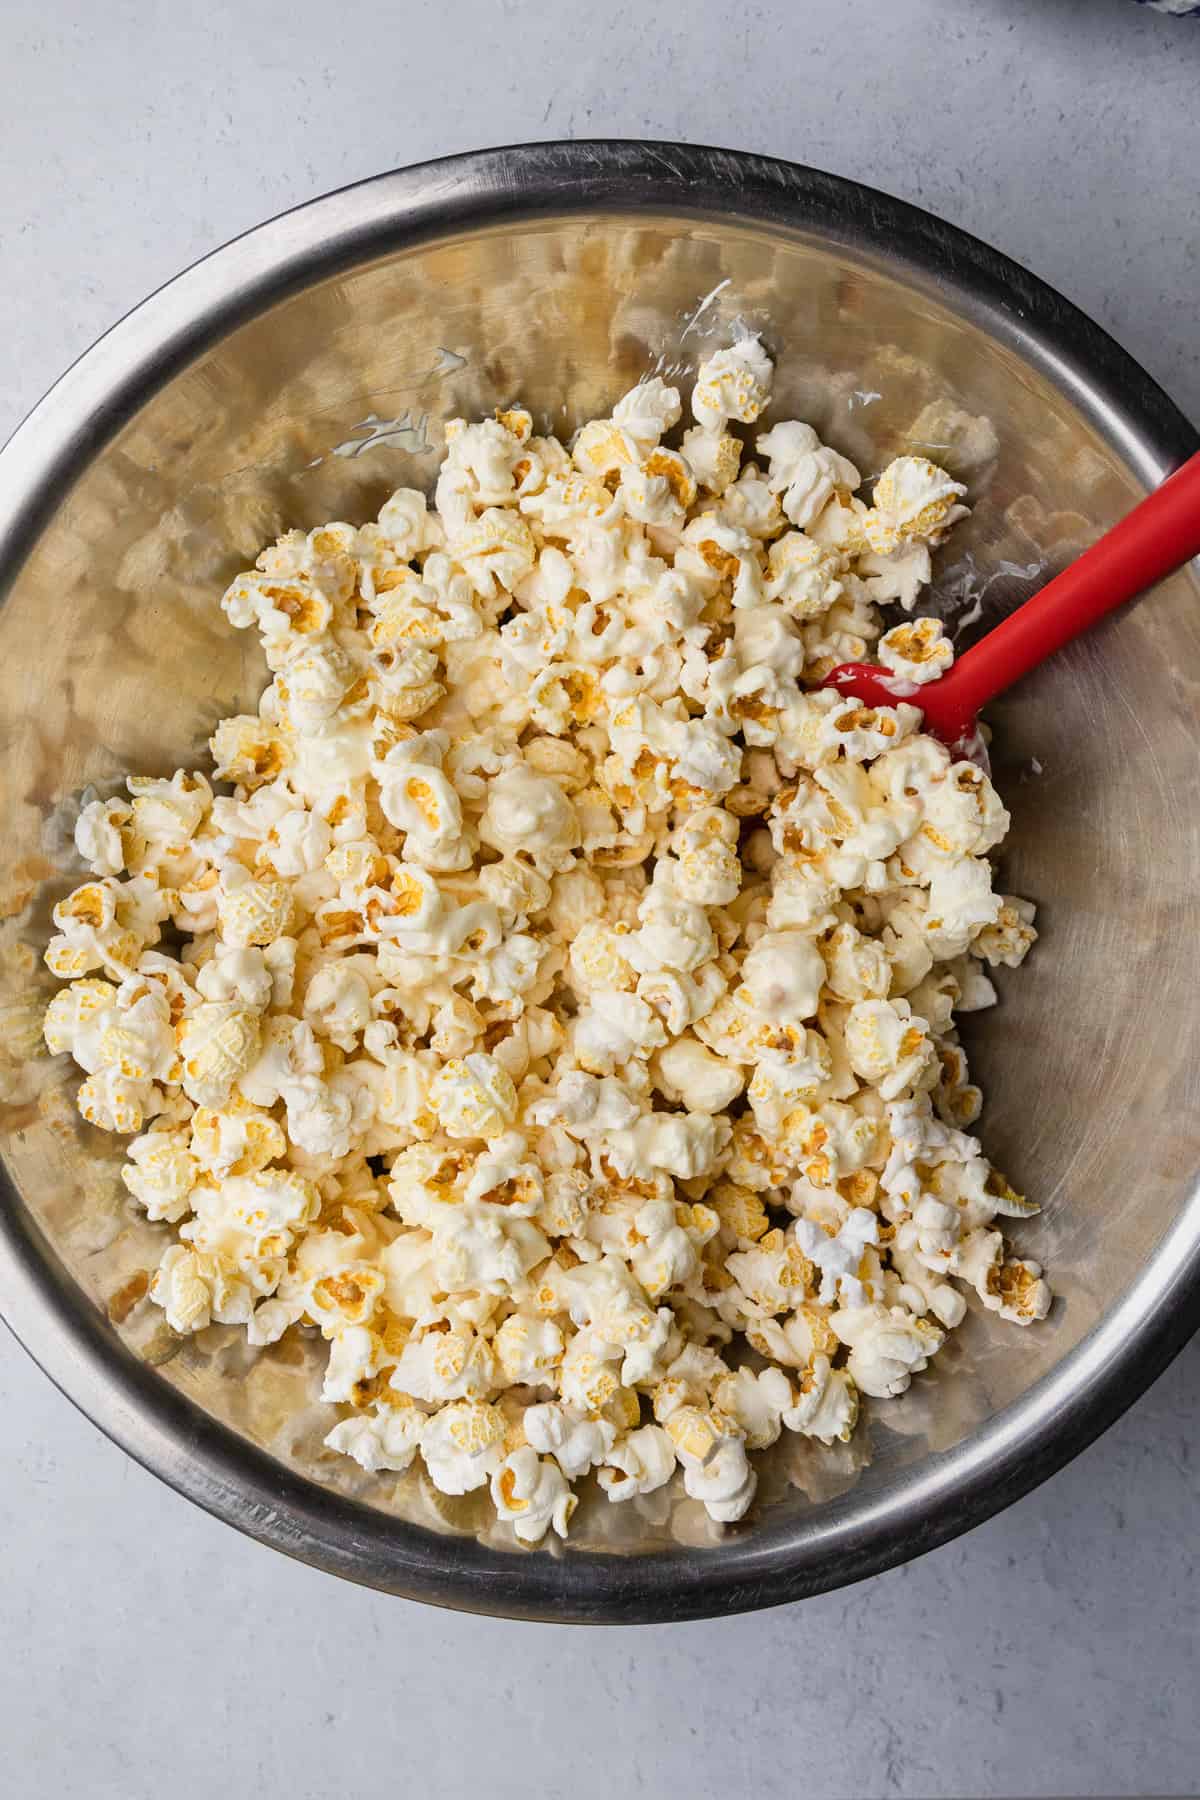 Mixing melted white chocolate with popcorn.